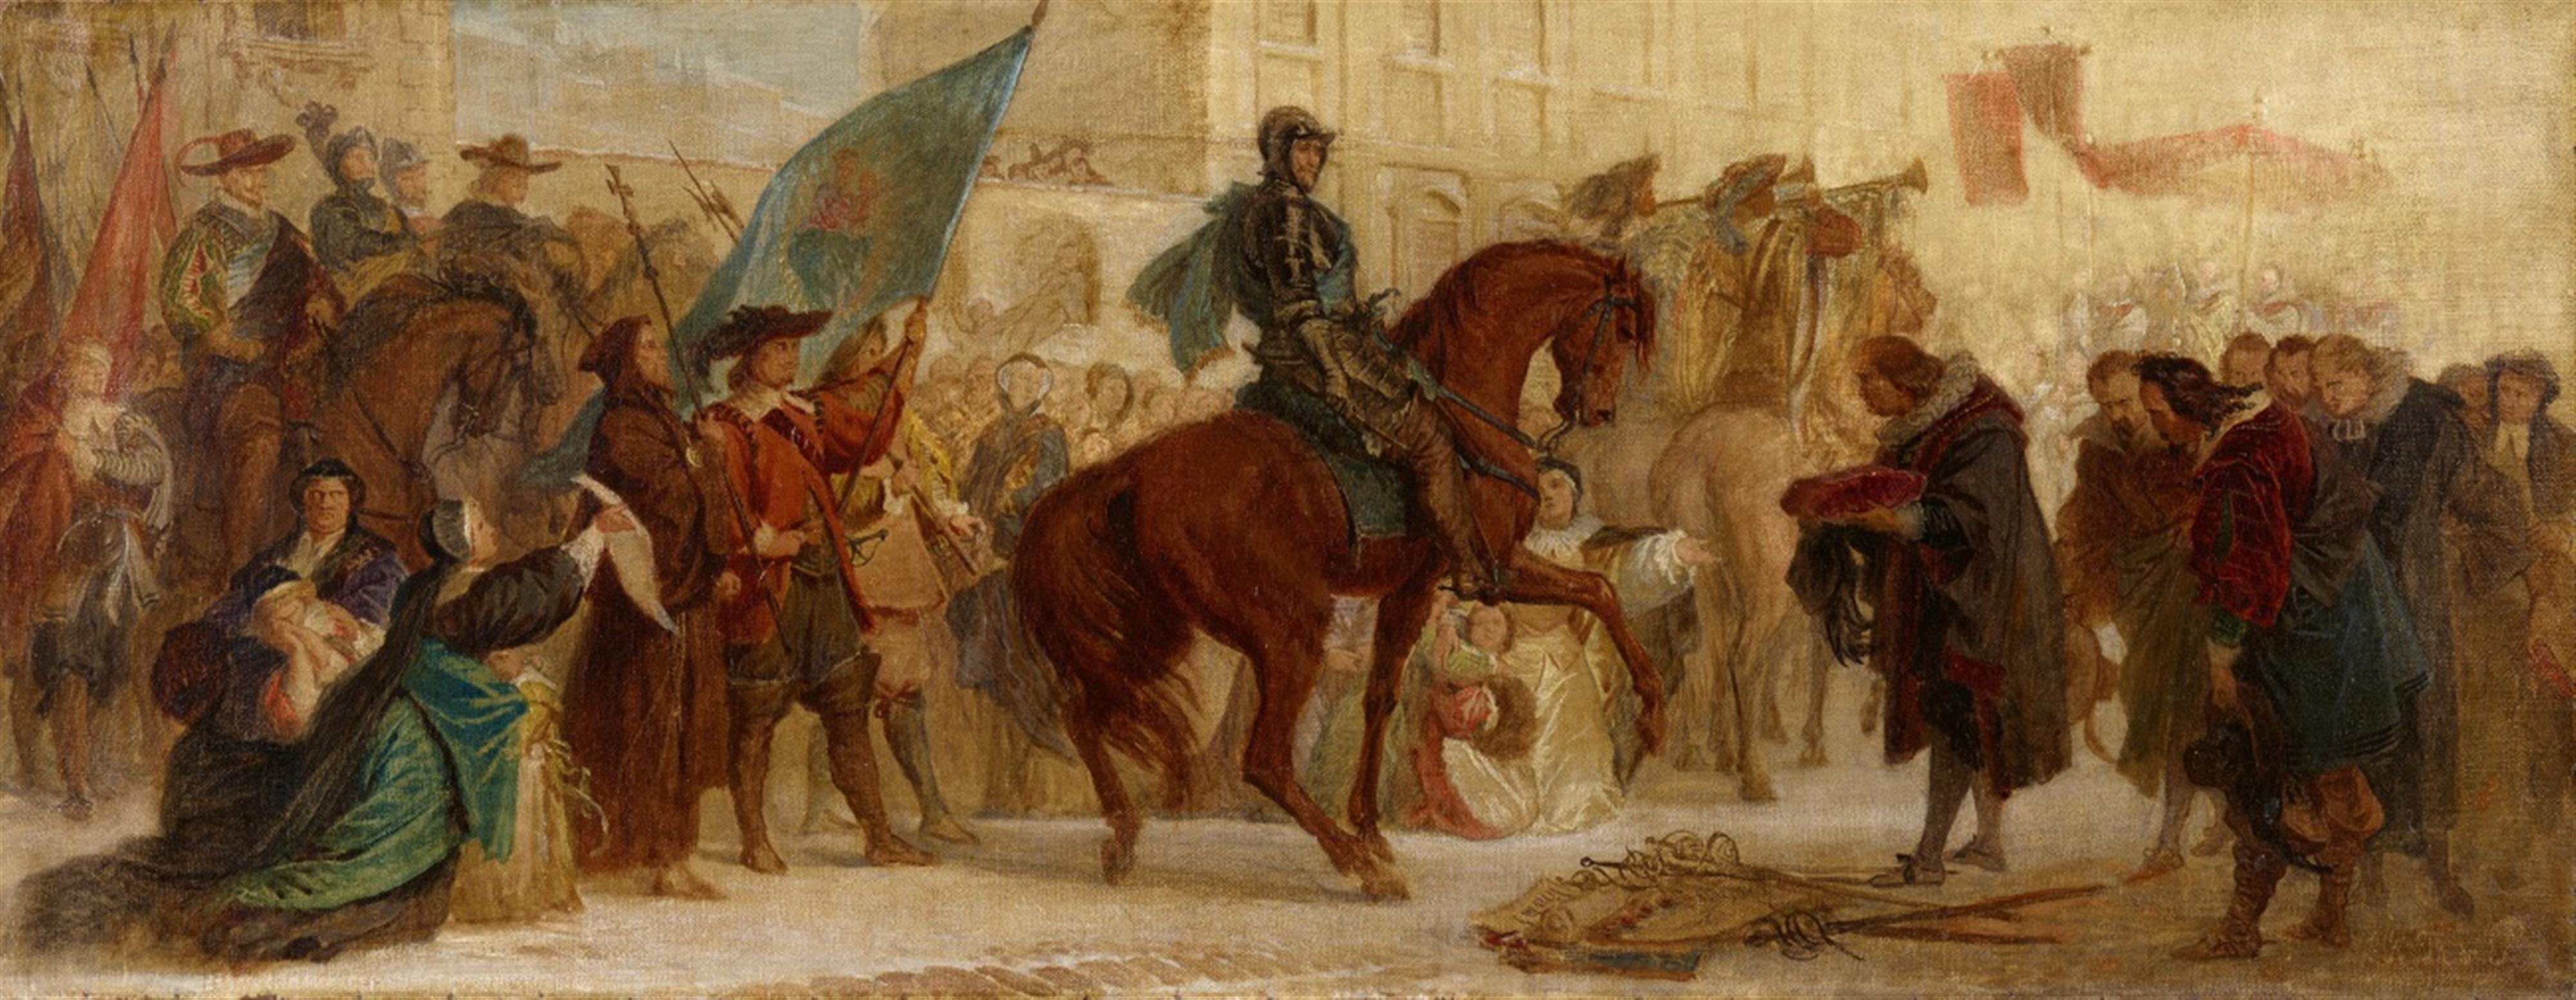 Ferdinand Piloty, attributed to - The Entry of Duke Maximilian I. into Prague after the Victory at the White Mountain 1620 - image-1